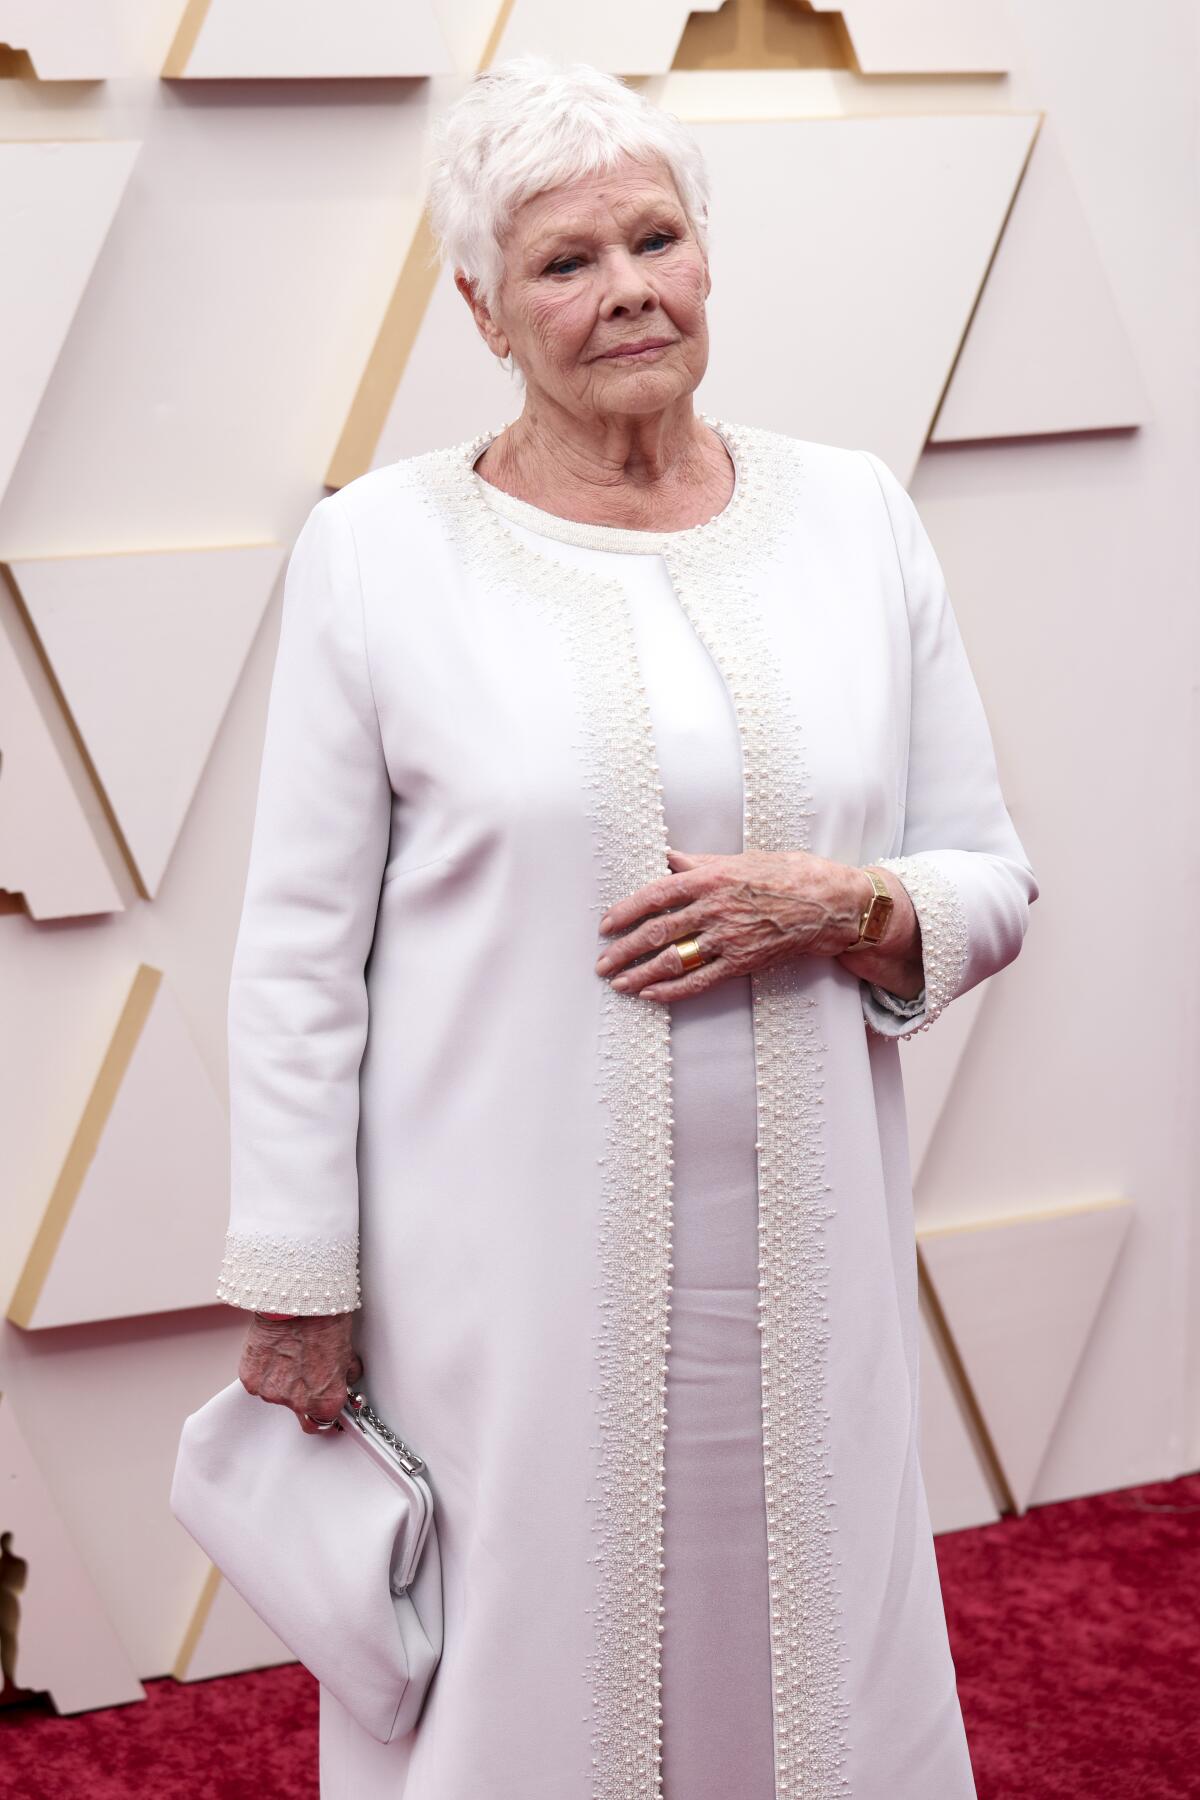 A woman stands on a red carpet dressed in white